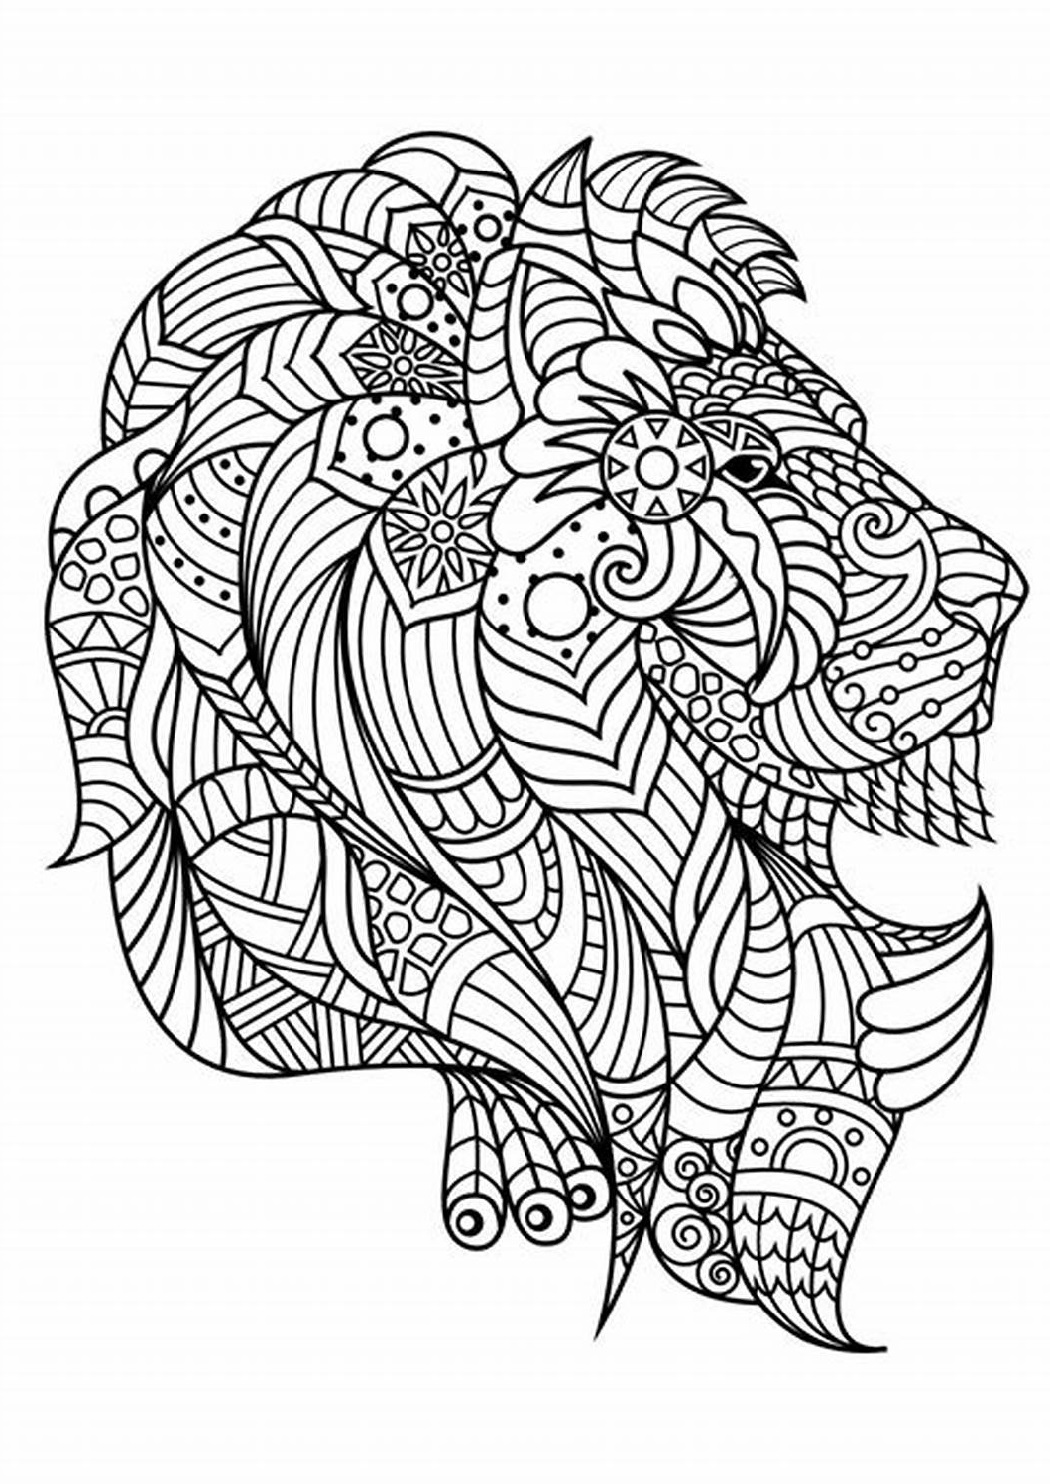 Coloring Pages To Print For Adults Lion